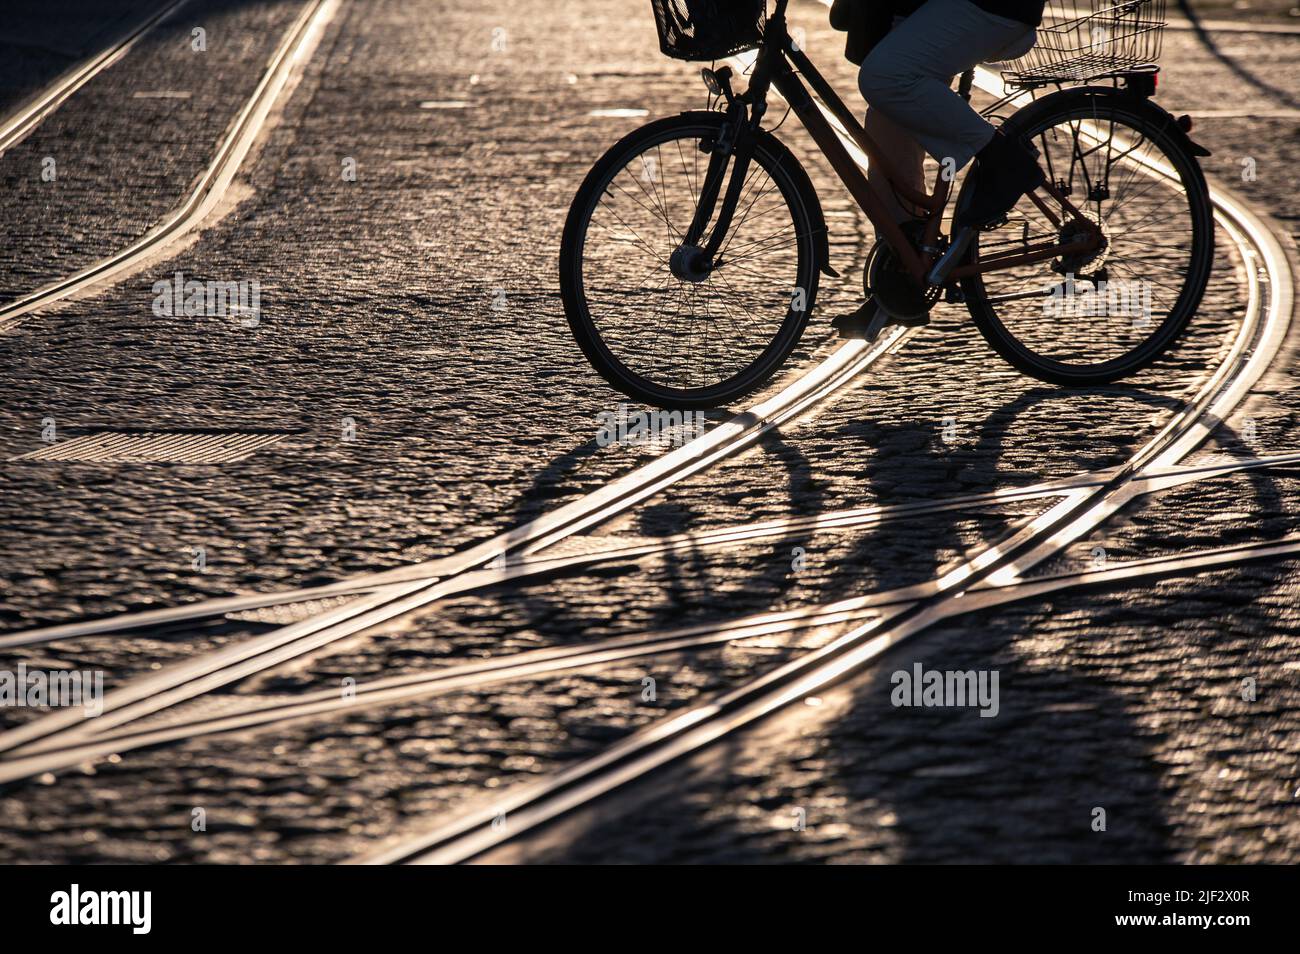 Environmentally friendly traffic by bike or tram presented as a trendy street photography Stock Photo